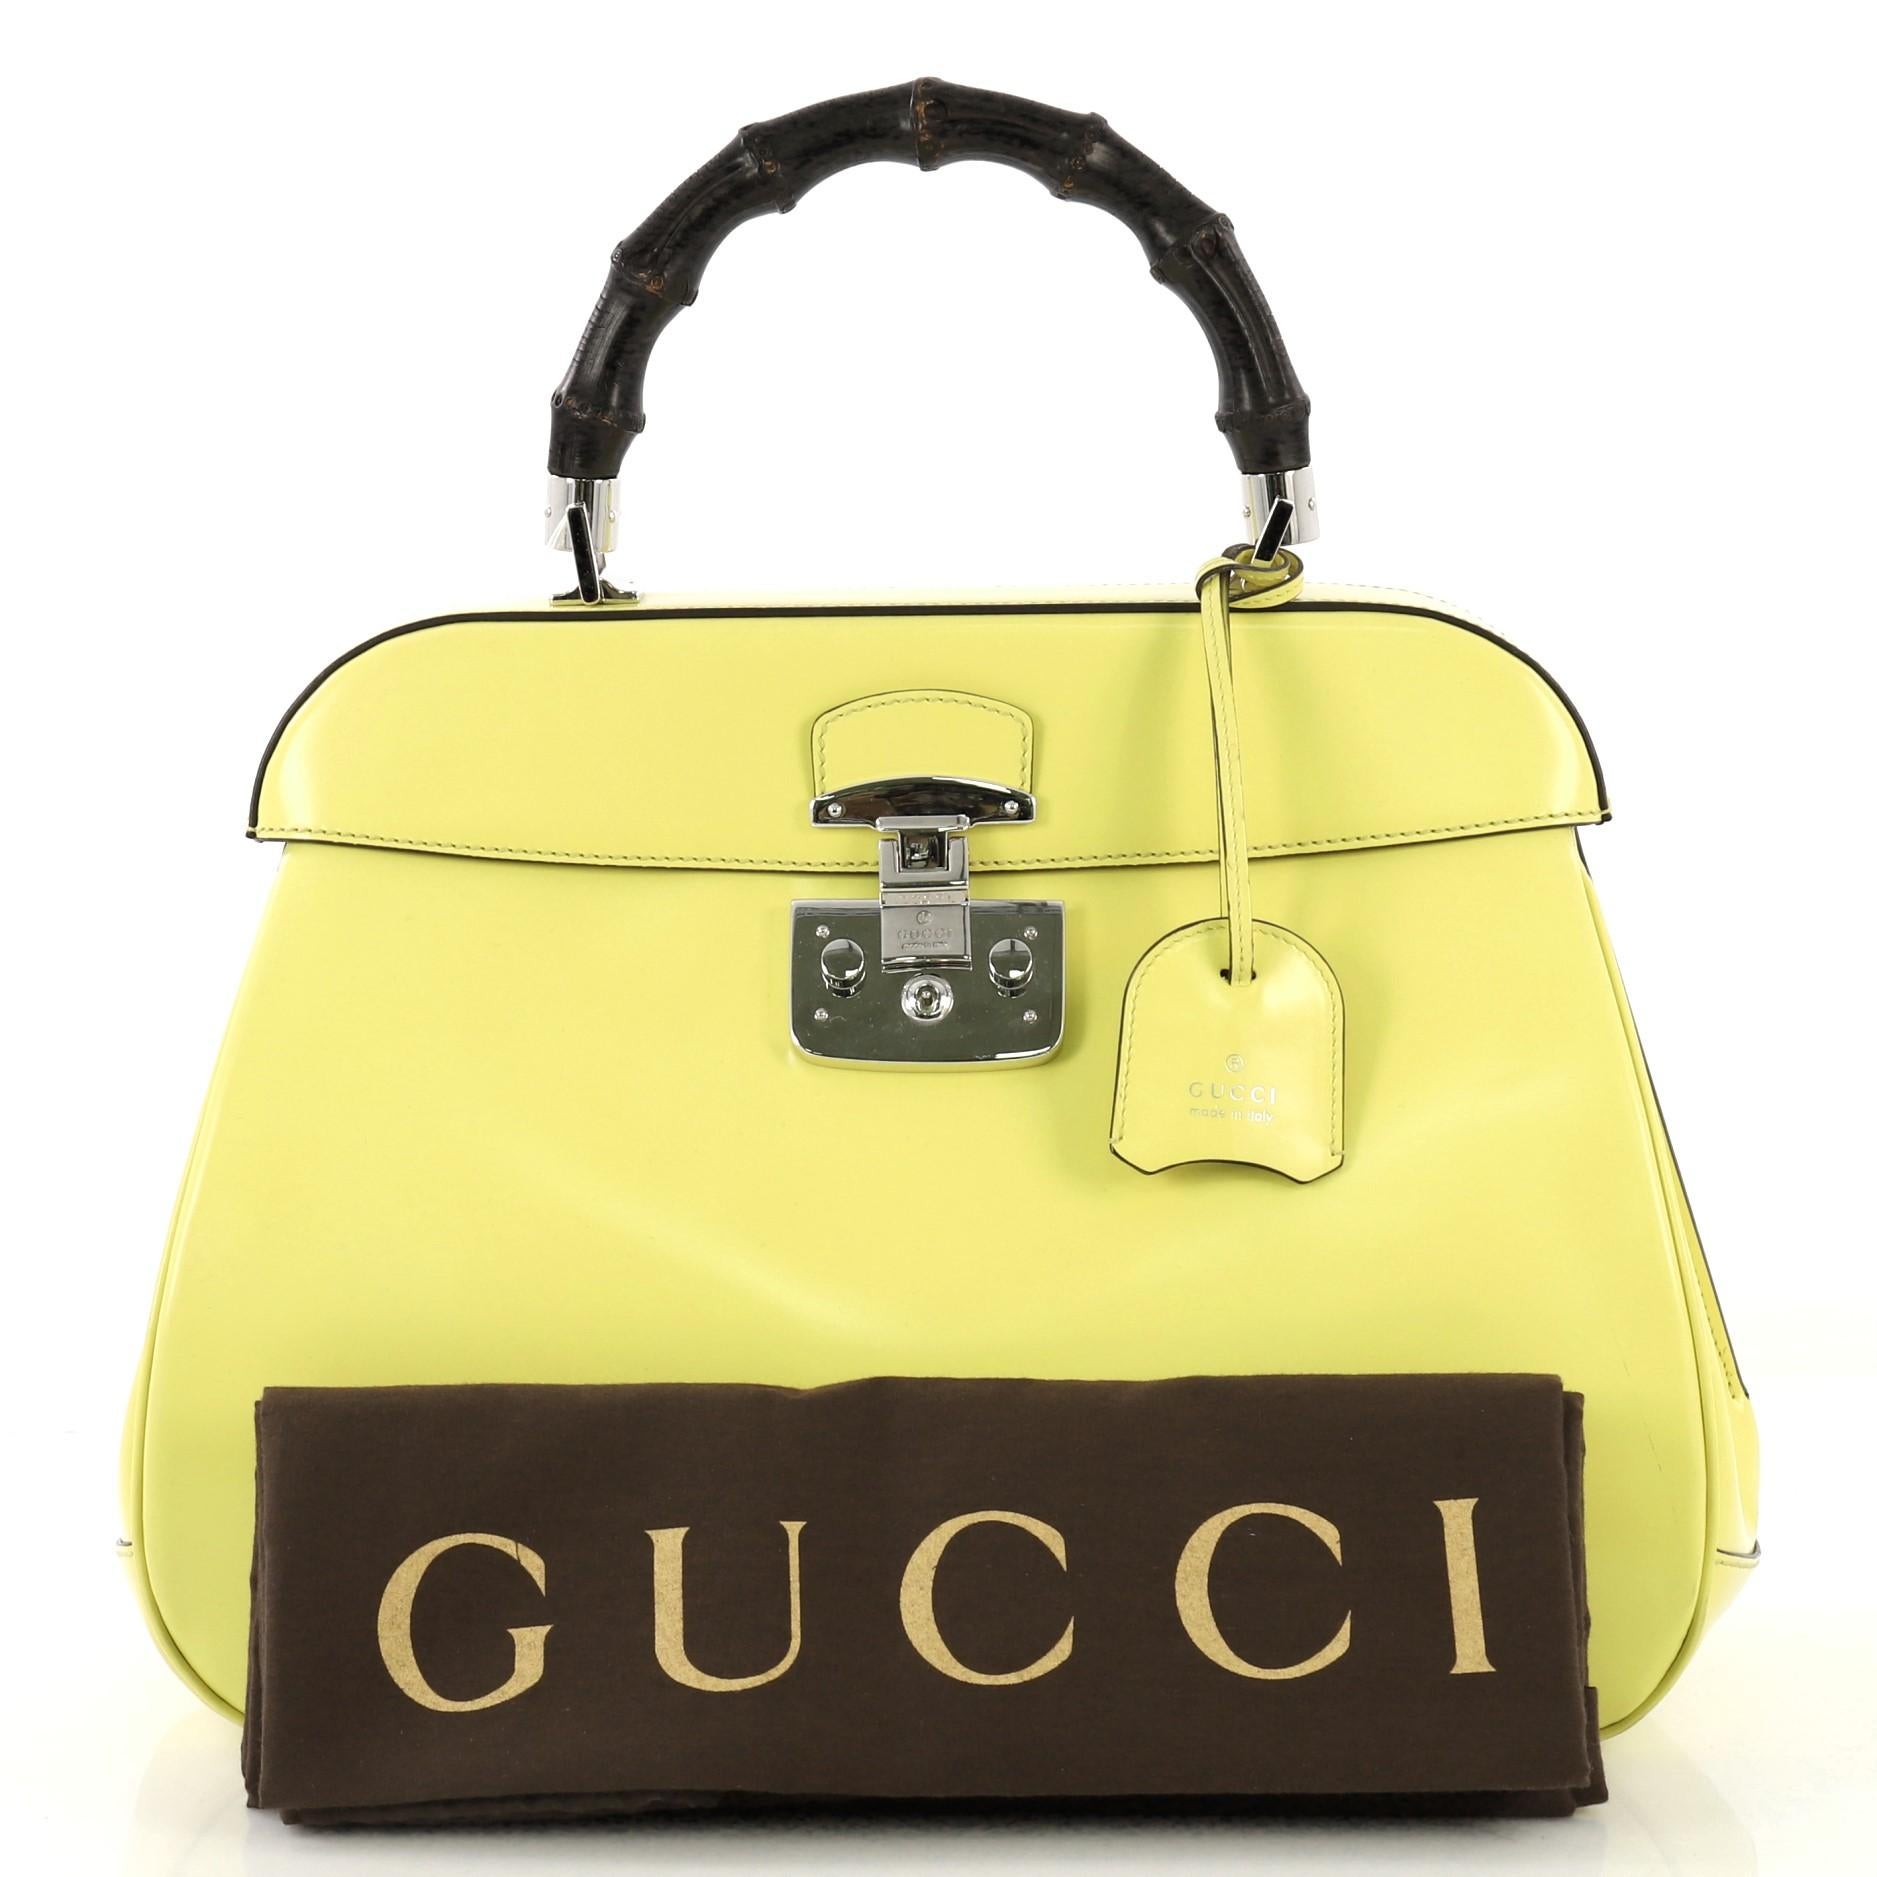 This Gucci Lady Lock Bamboo Top Handle Bag Leather Large, crafted in yellow leather, features a single loop bamboo handle and silver-tone hardware. Its flap with lady lock closure opens to a gray microfiber interior divided into two compartments